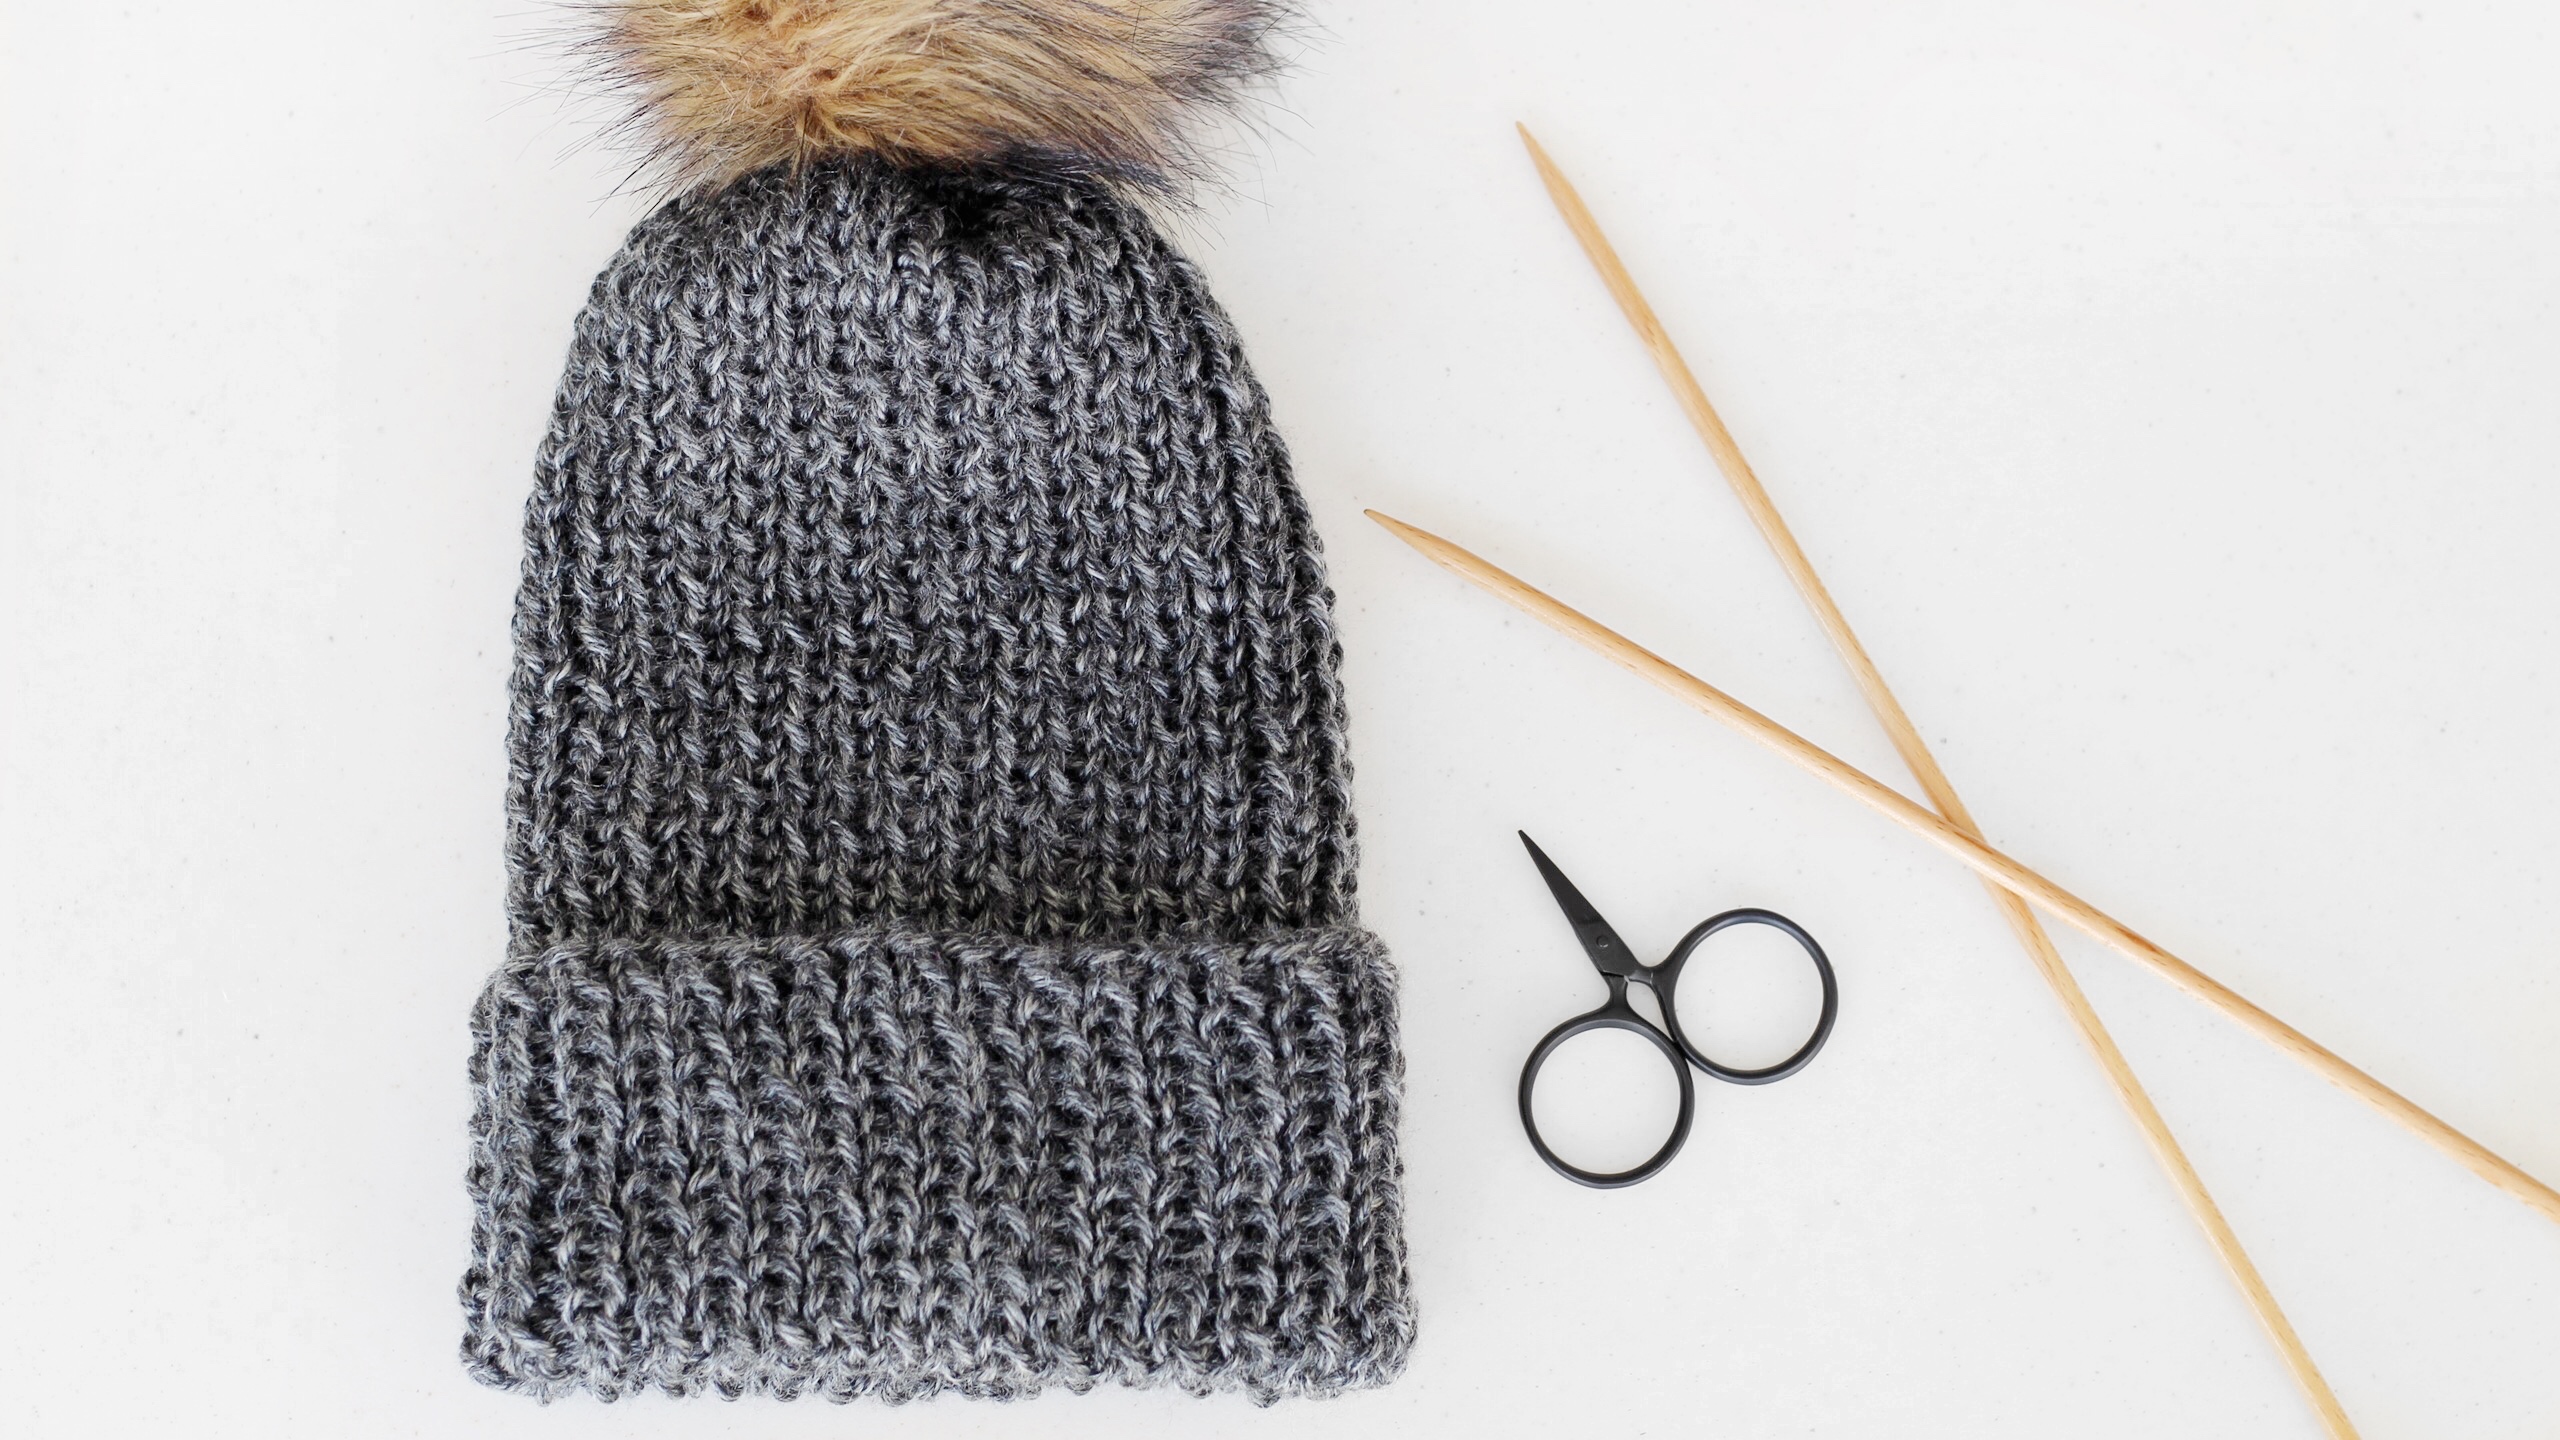 5 Simple Steps to Designing Your First Hat Knitting Pattern